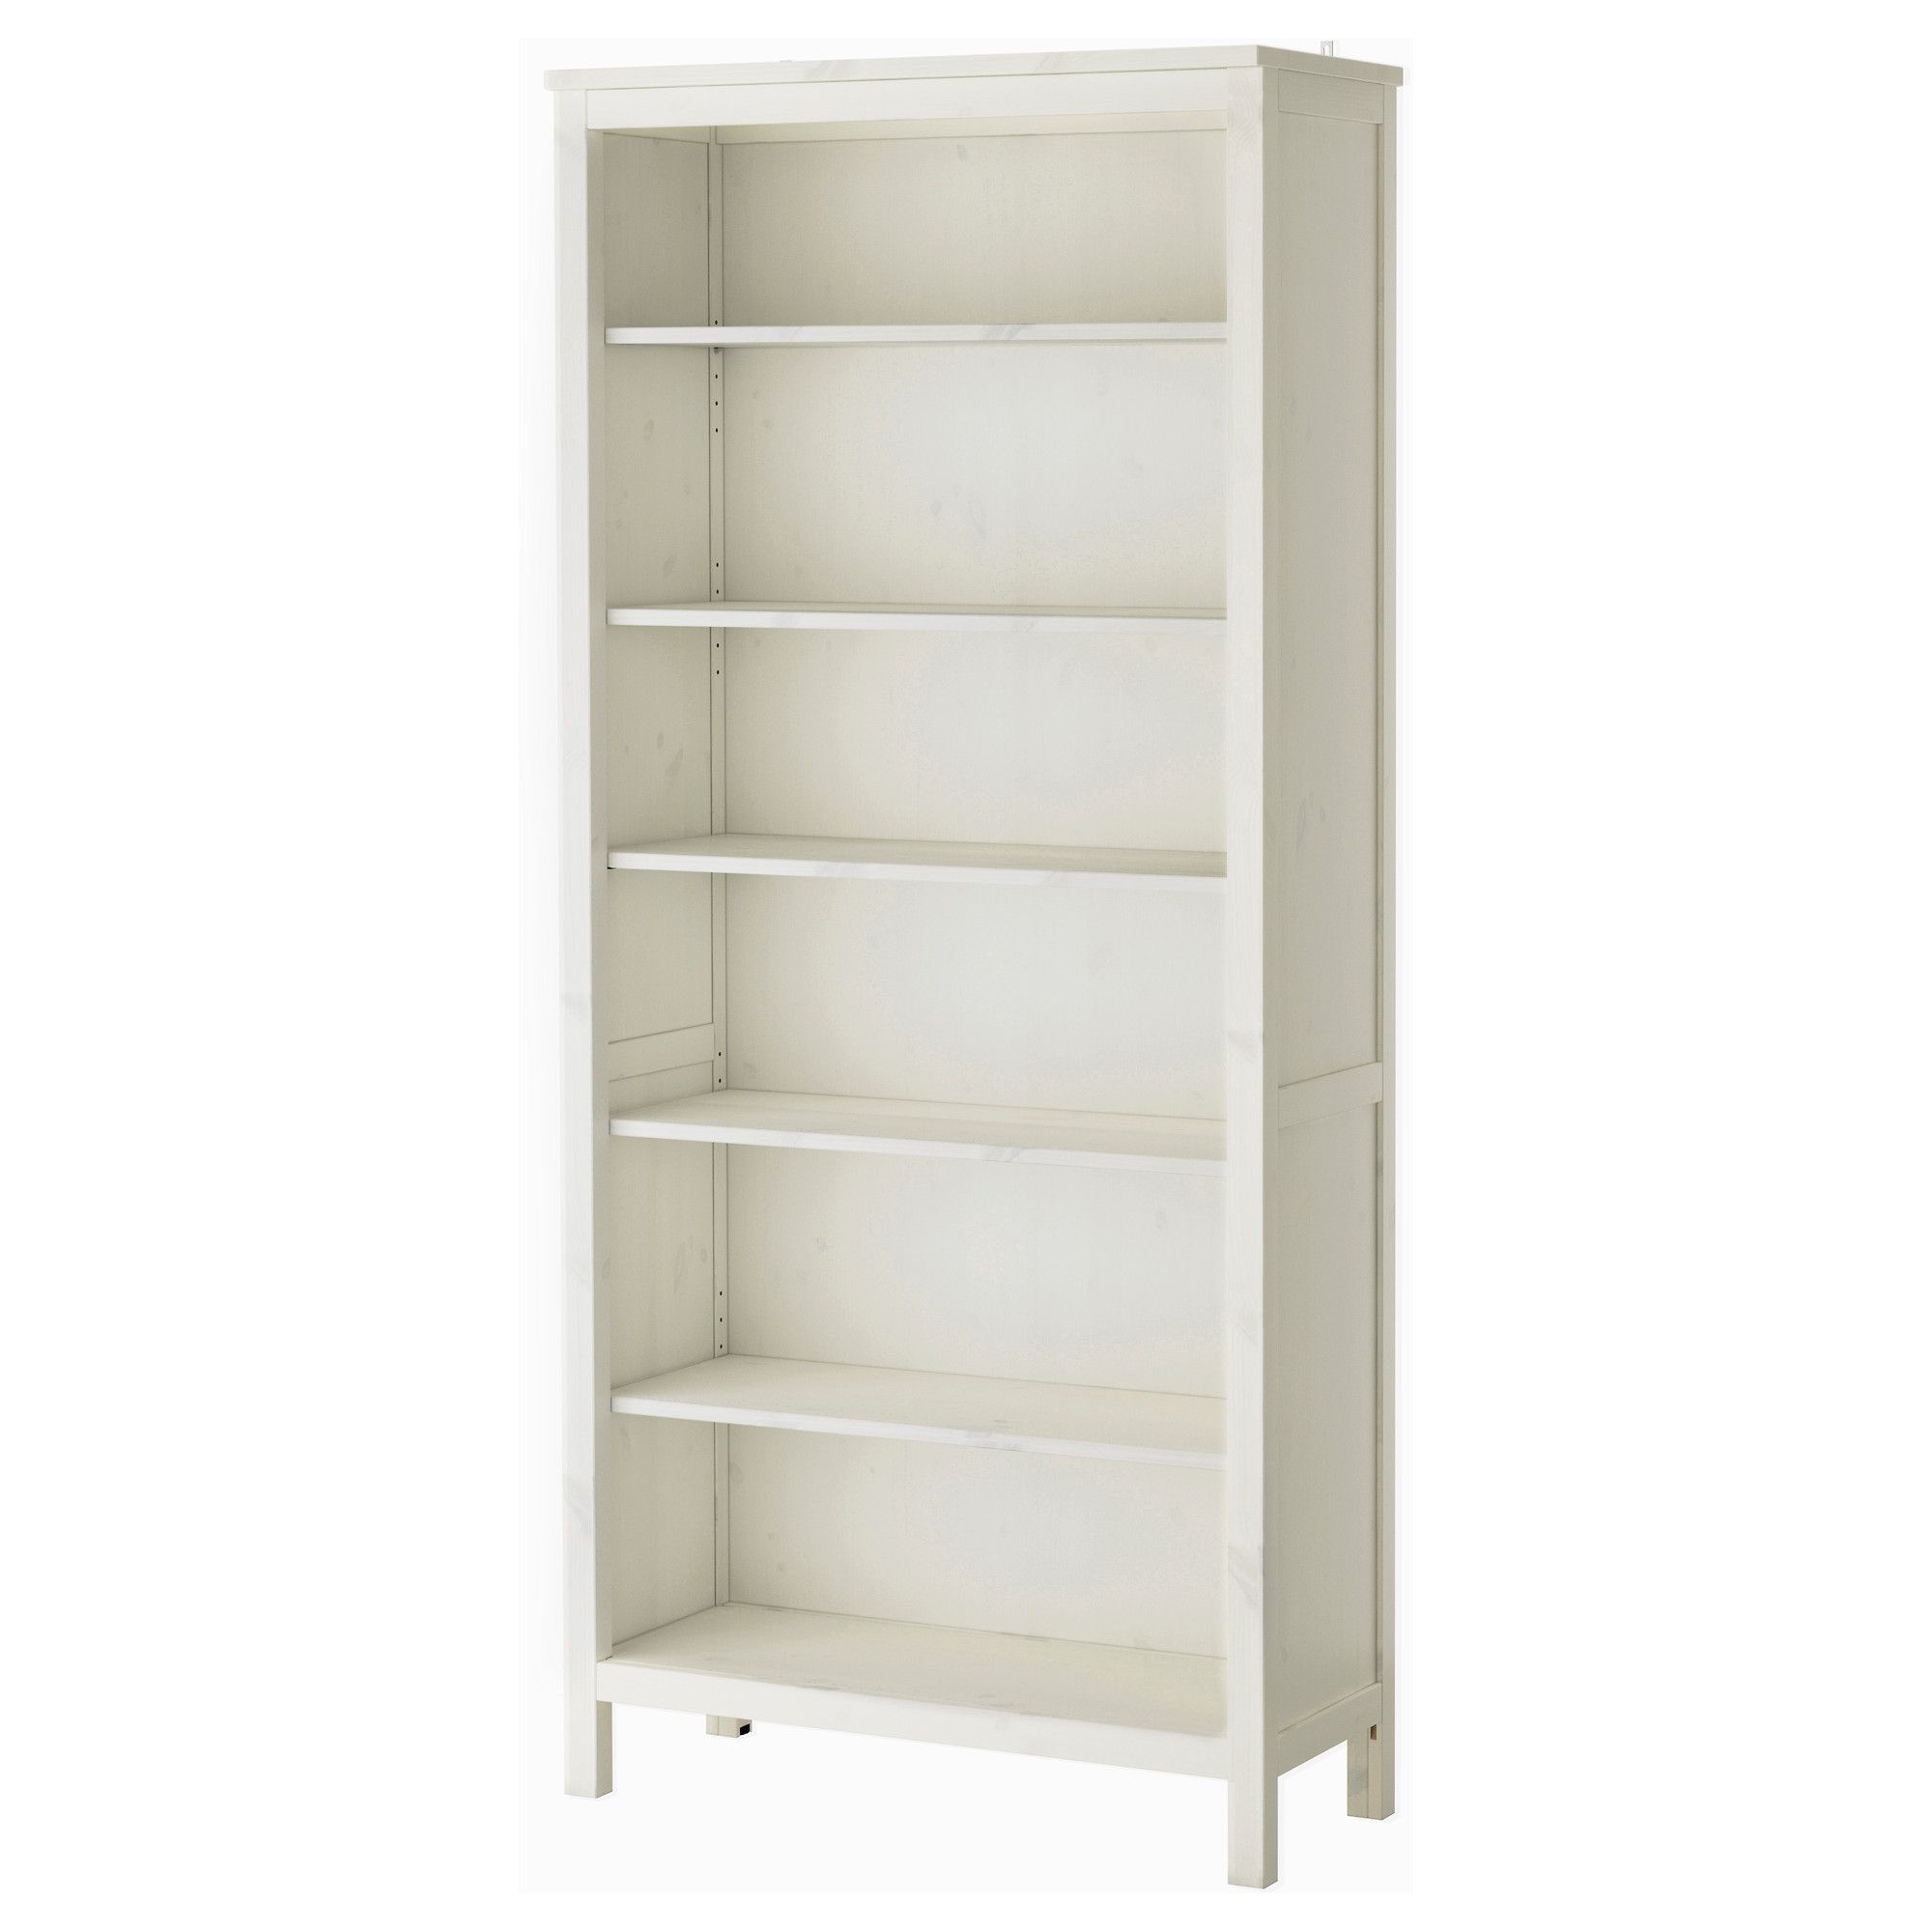 Hemnes Bookcase White Stain Ikea For White Bookcases (View 4 of 15)